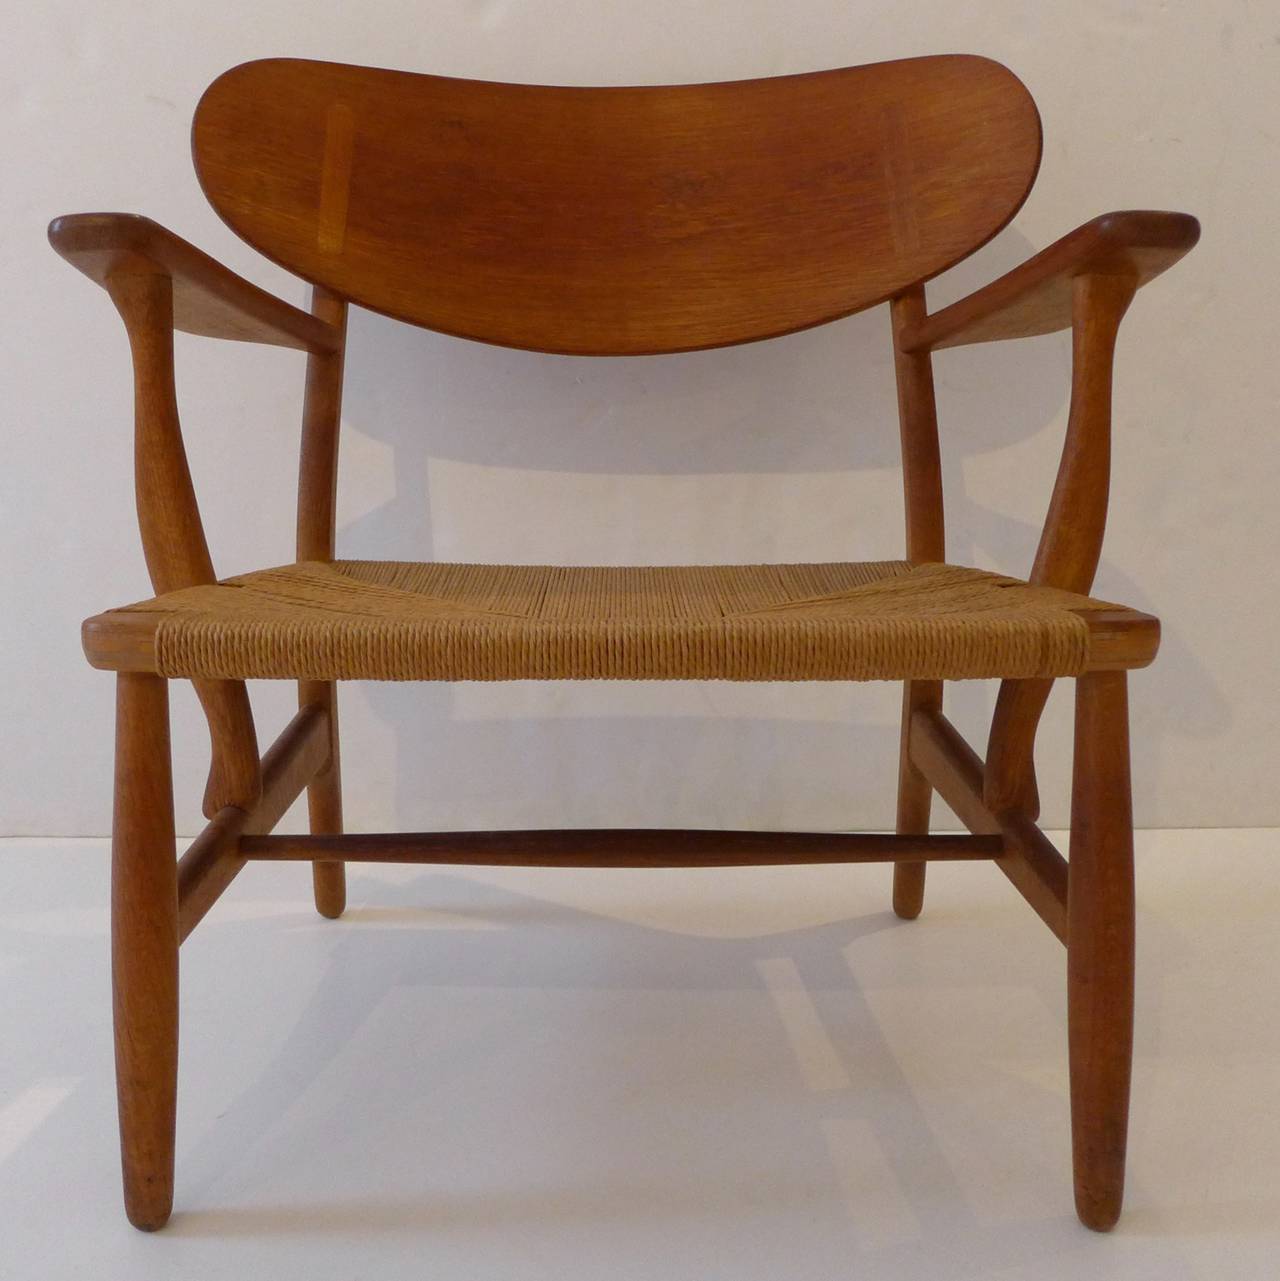 VIntage CH-22 lounge chair in stained oak with a laminated oak and woven paper cord seat. Designed by Hans Wegner in 1951 and produced by Carl Hansen c. 1950's.  A classic combination of sculptural beauty and comfort by one of Denmark's (and,